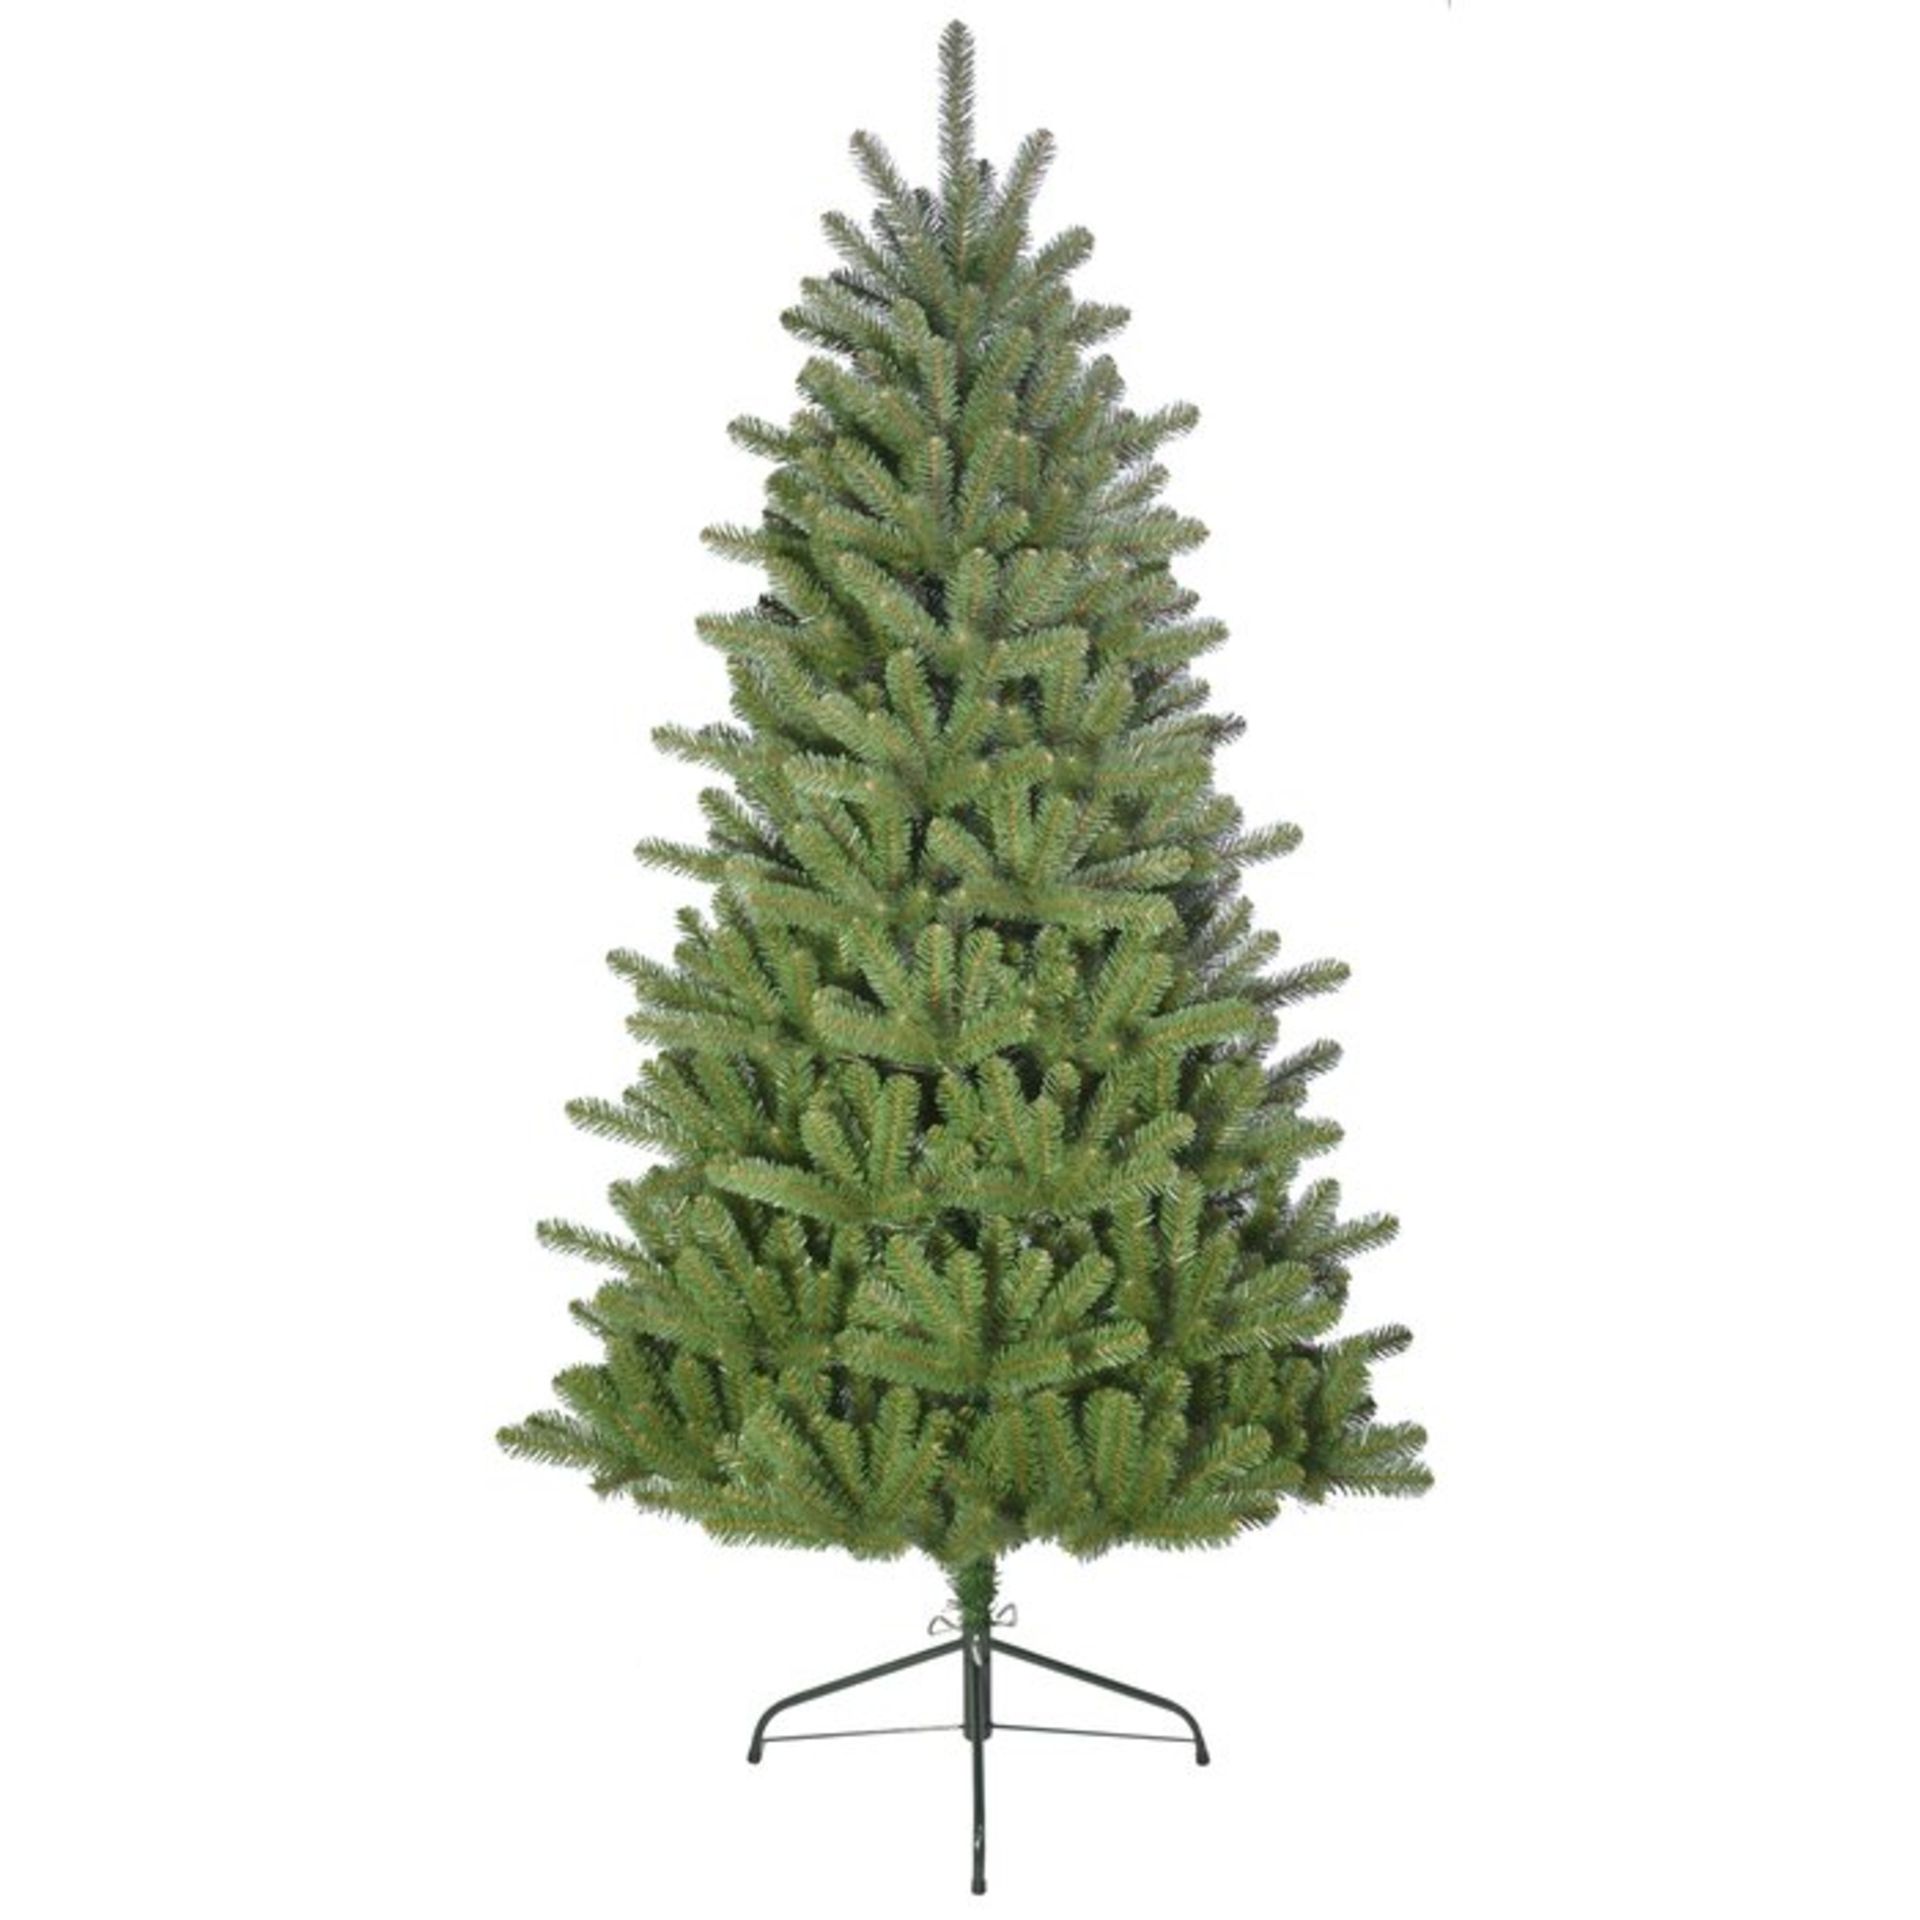 Palmdale Green Spruce Artificial Christmas Tree with Stand - RRP £84.99